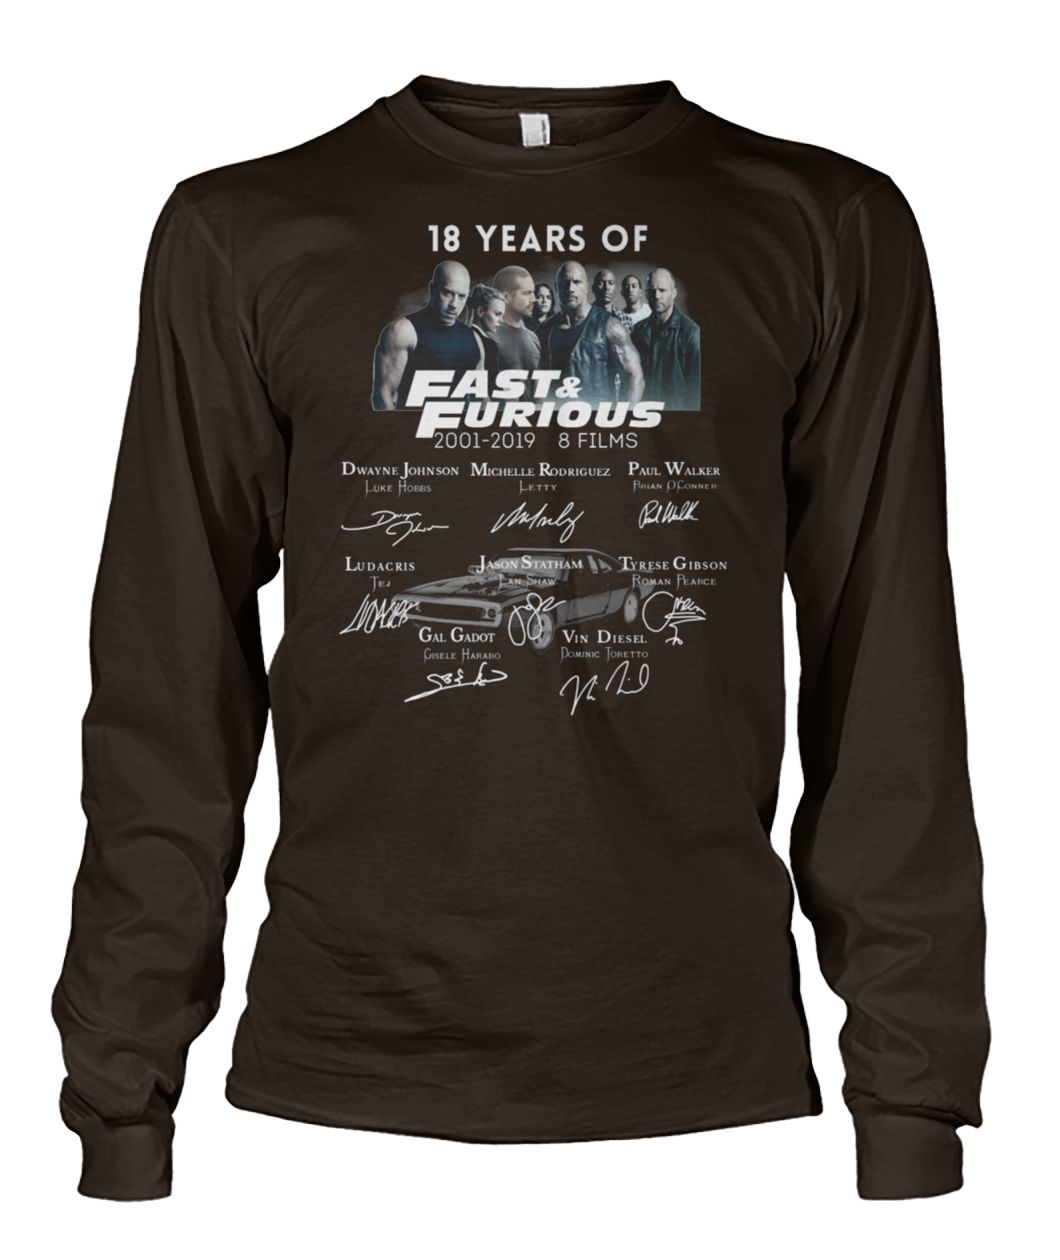 18 years of fast and furious 2001 2019 8 films unisex long sleeve